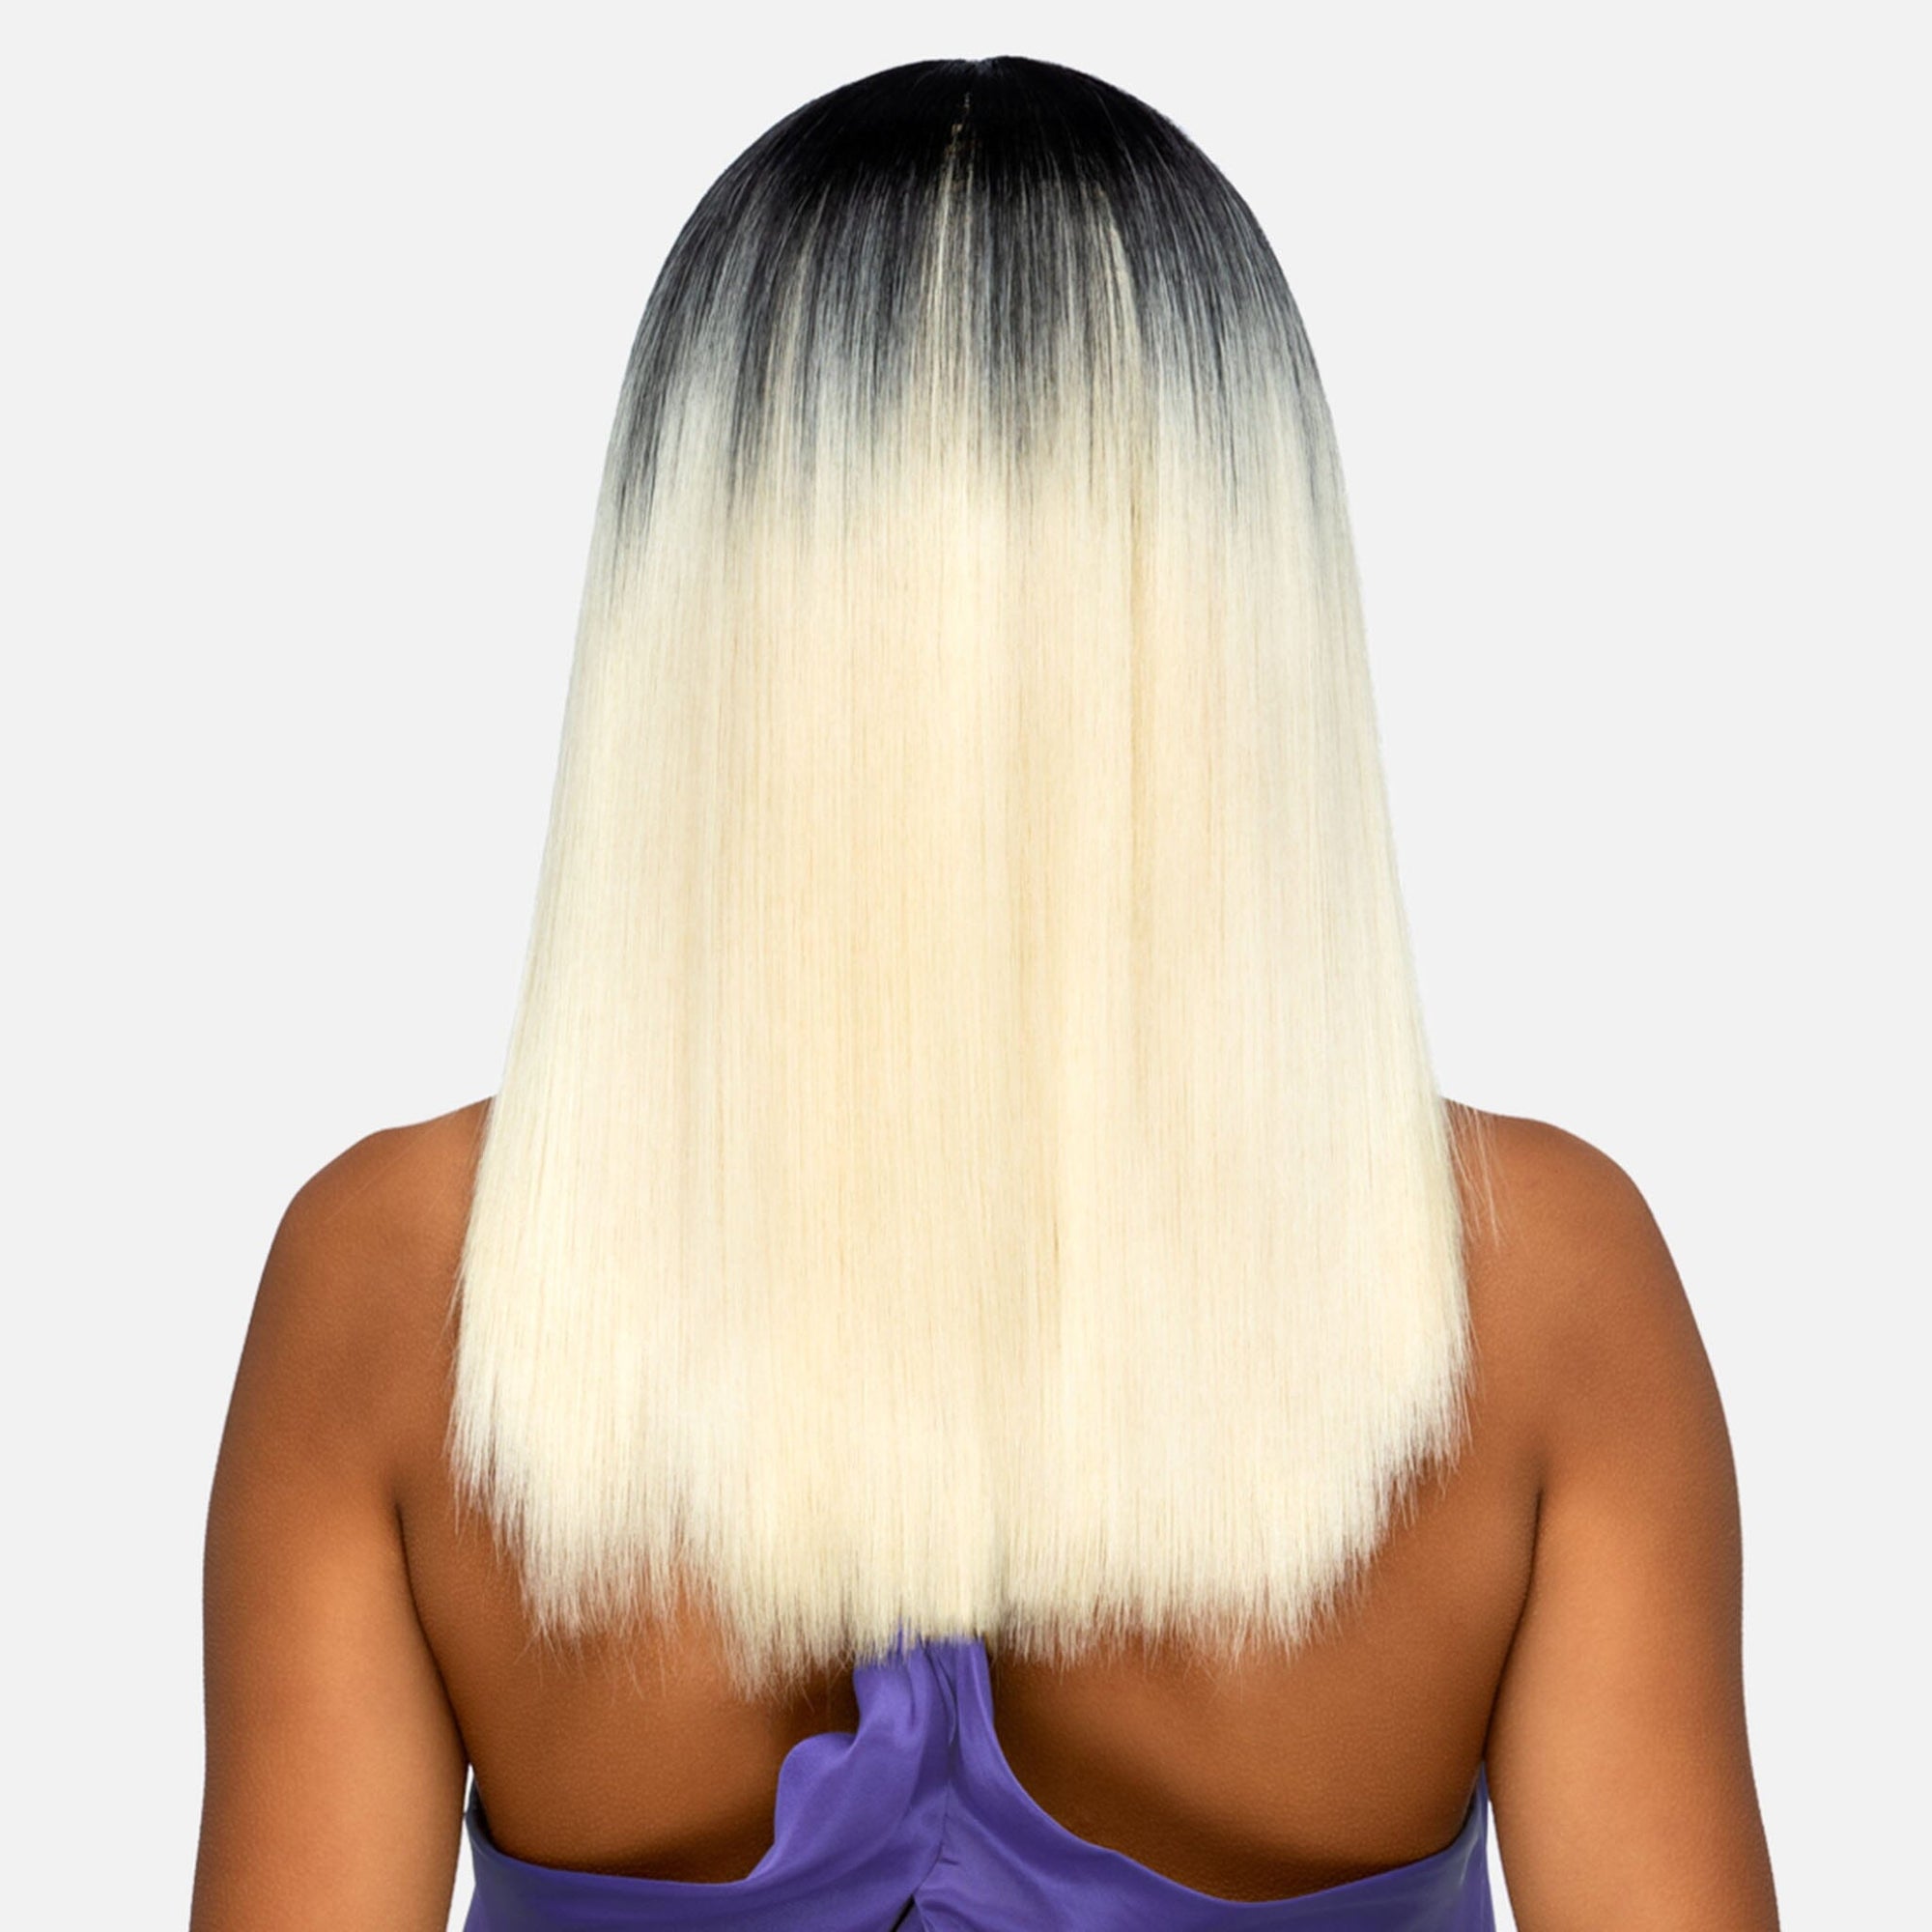 (3T1B/60/30) Three Tone: Off Black Top, Silver White Middle, and Copper Blonde Bottom